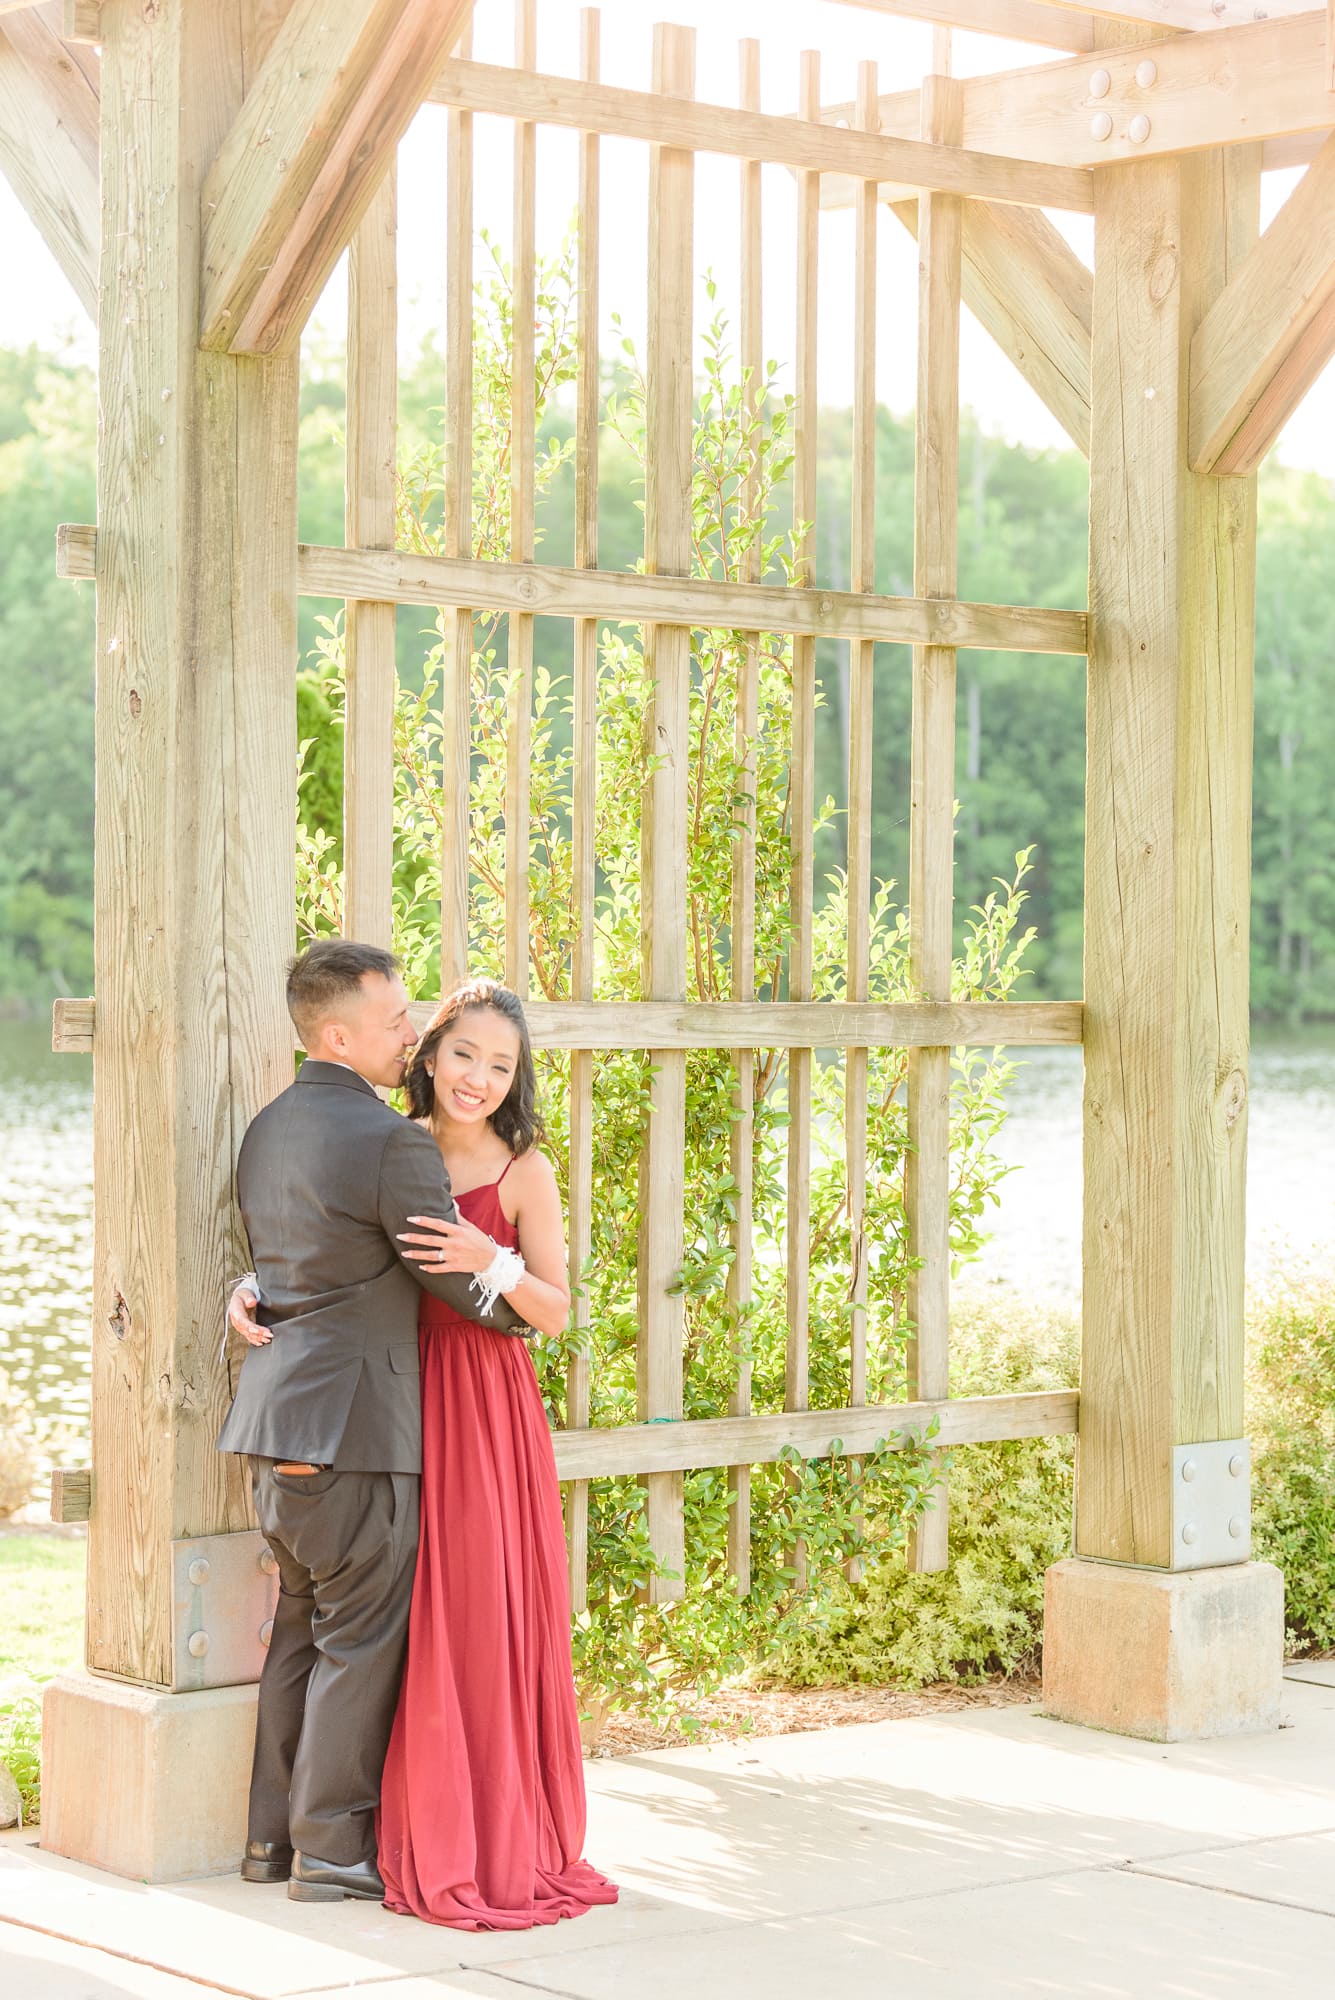 A wedding at Colonel Francis Beatty Park means you can have this gorgeous lattice in your photos.